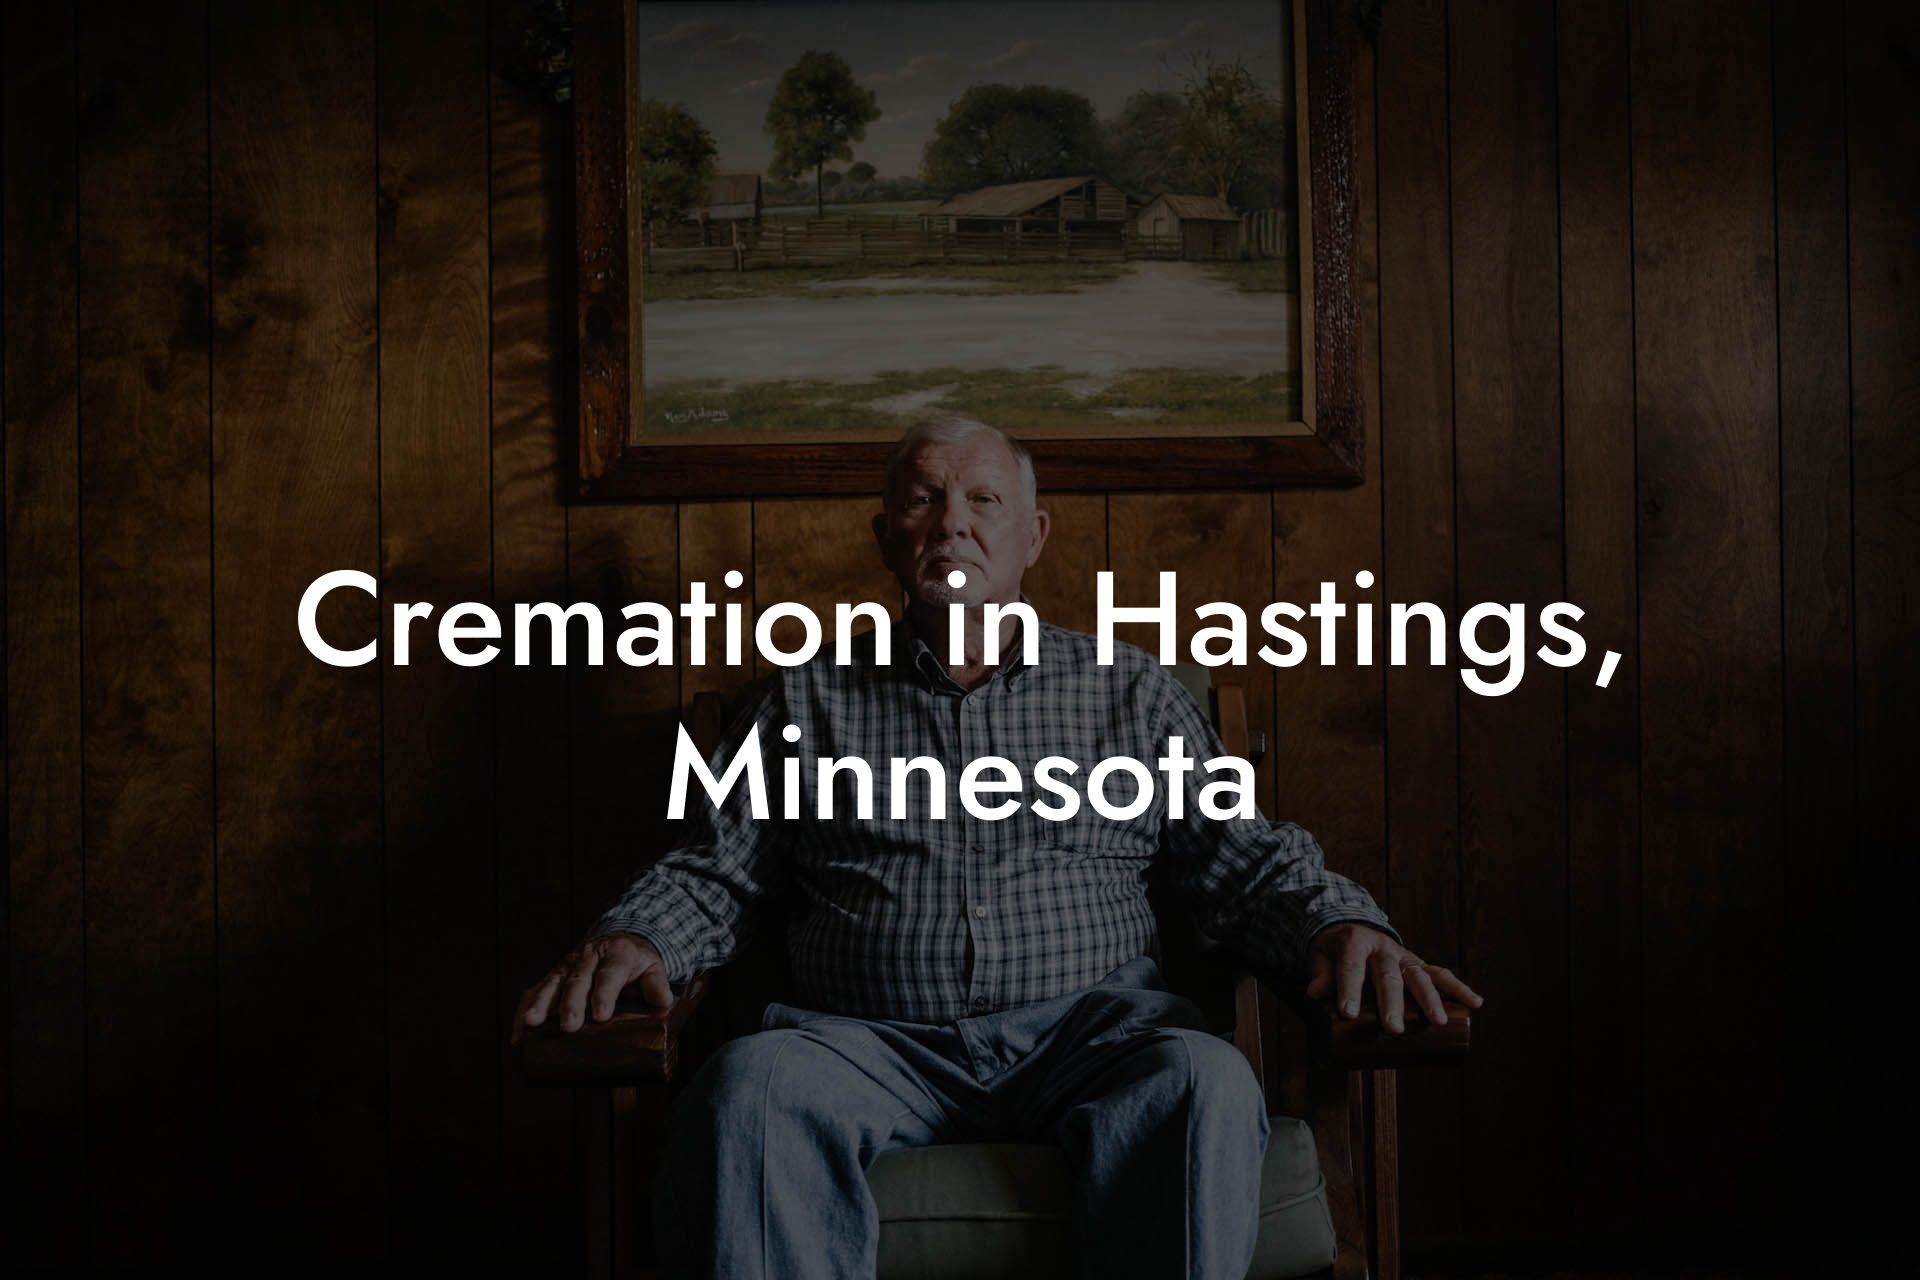 Cremation in Hastings, Minnesota